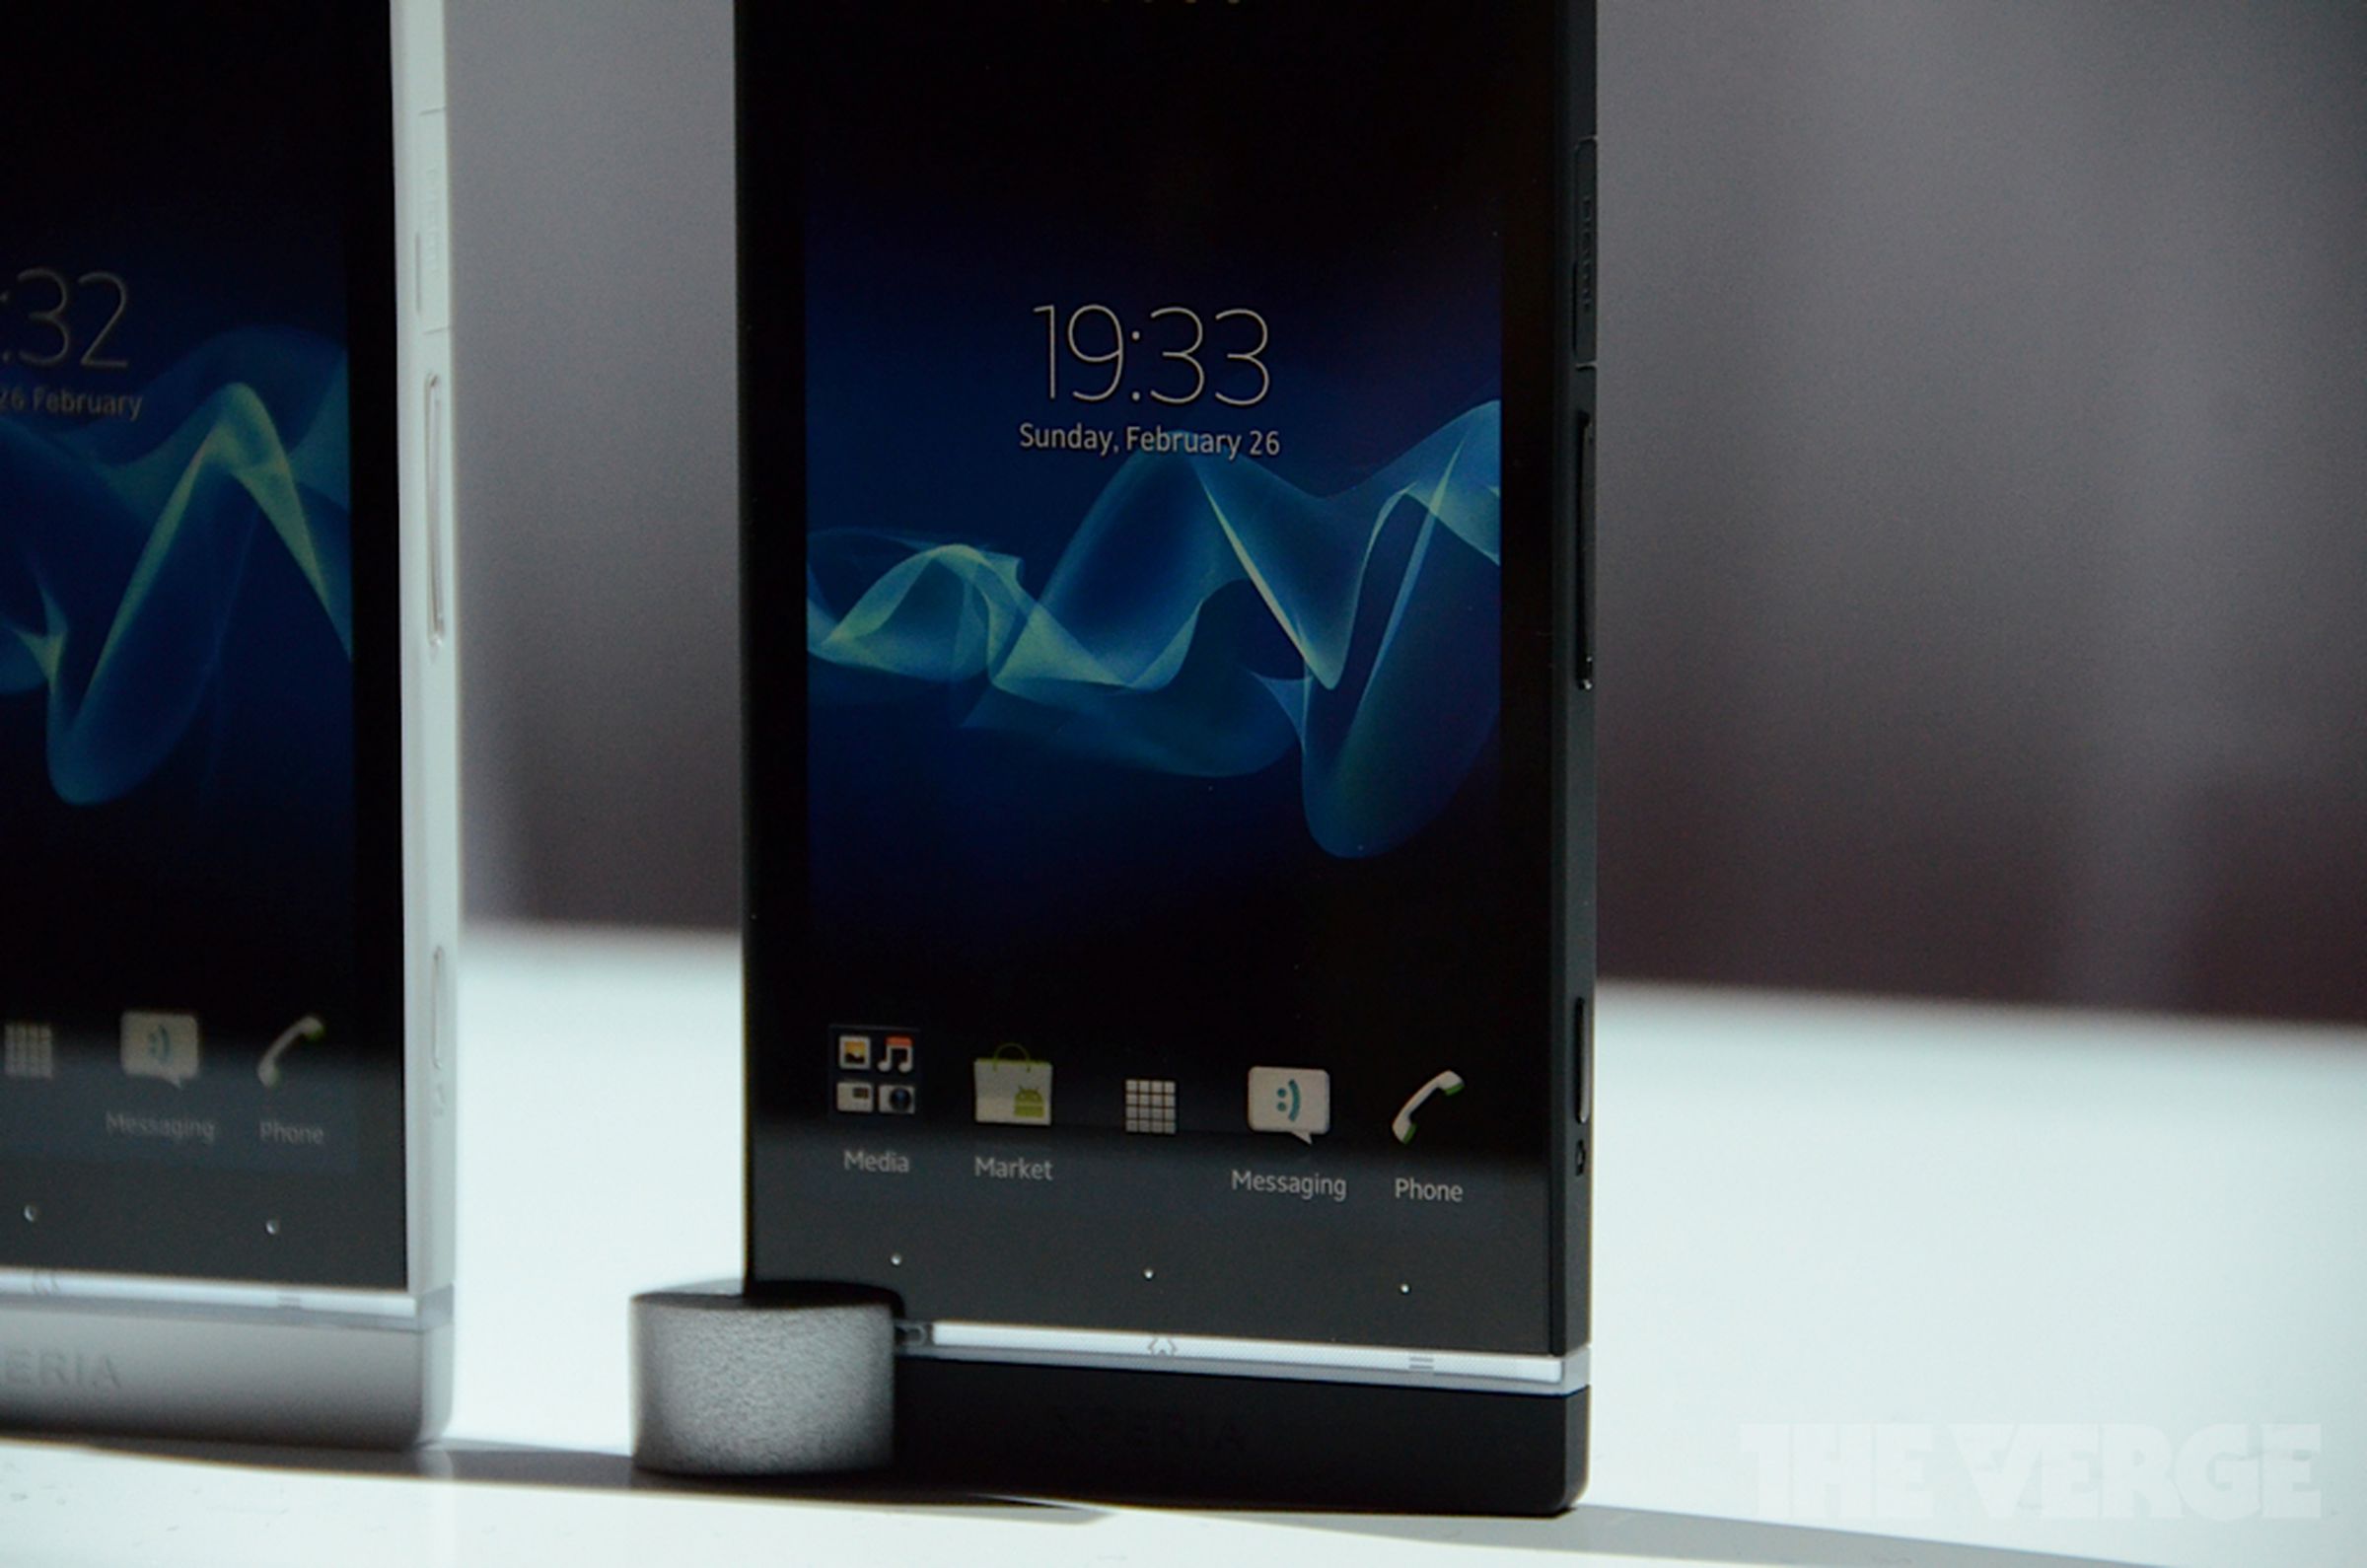 Sony Xperia U hands-on pictures